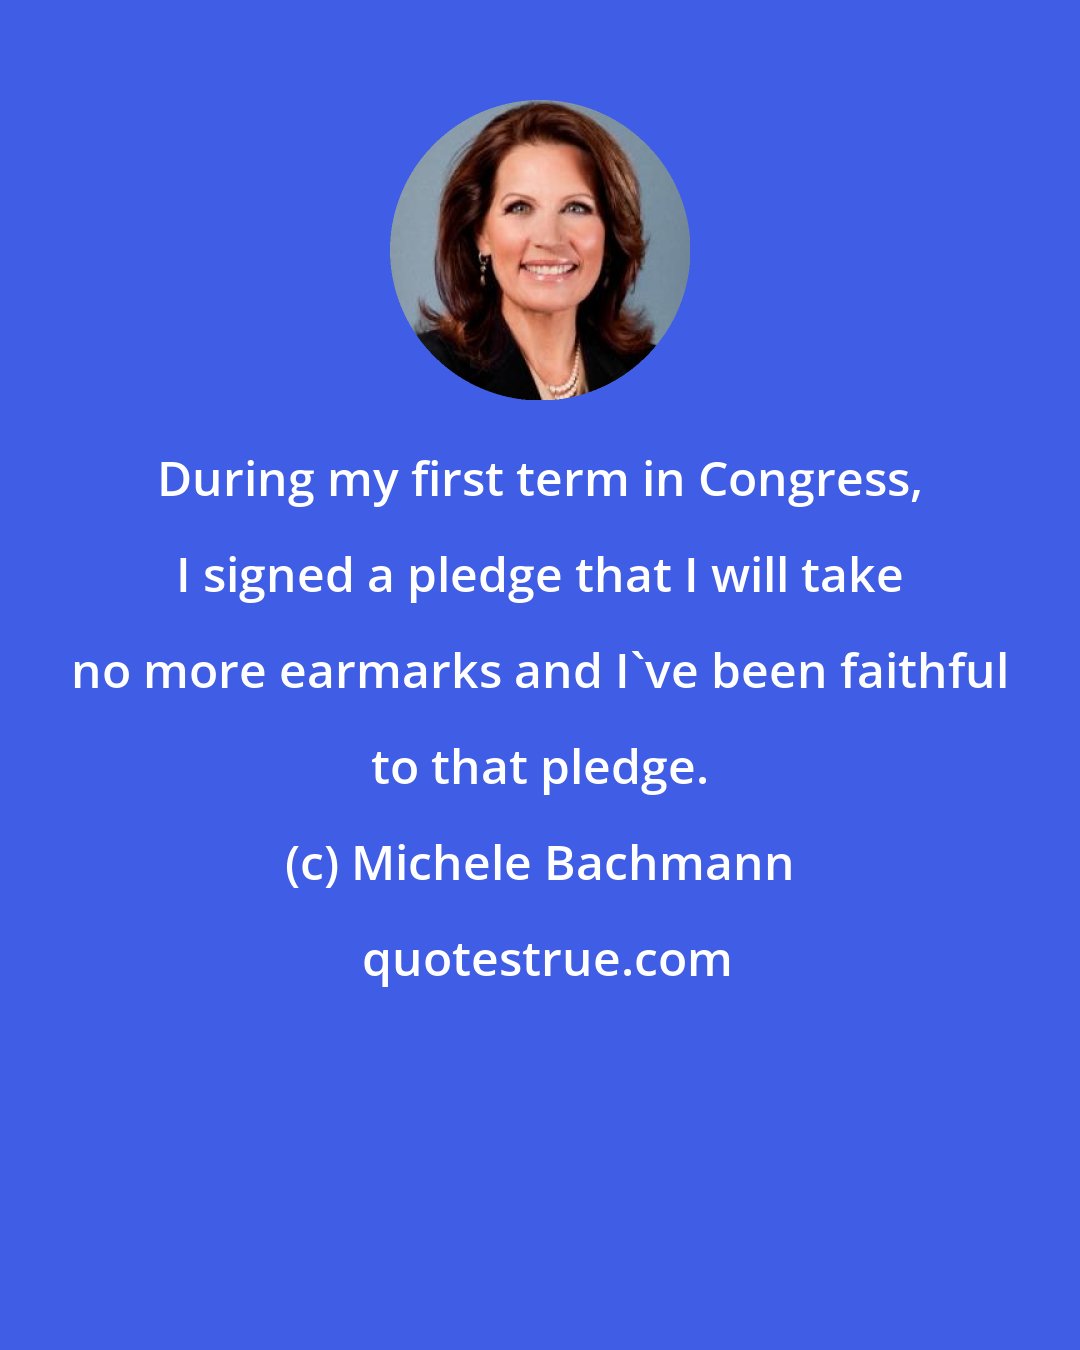 Michele Bachmann: During my first term in Congress, I signed a pledge that I will take no more earmarks and I've been faithful to that pledge.